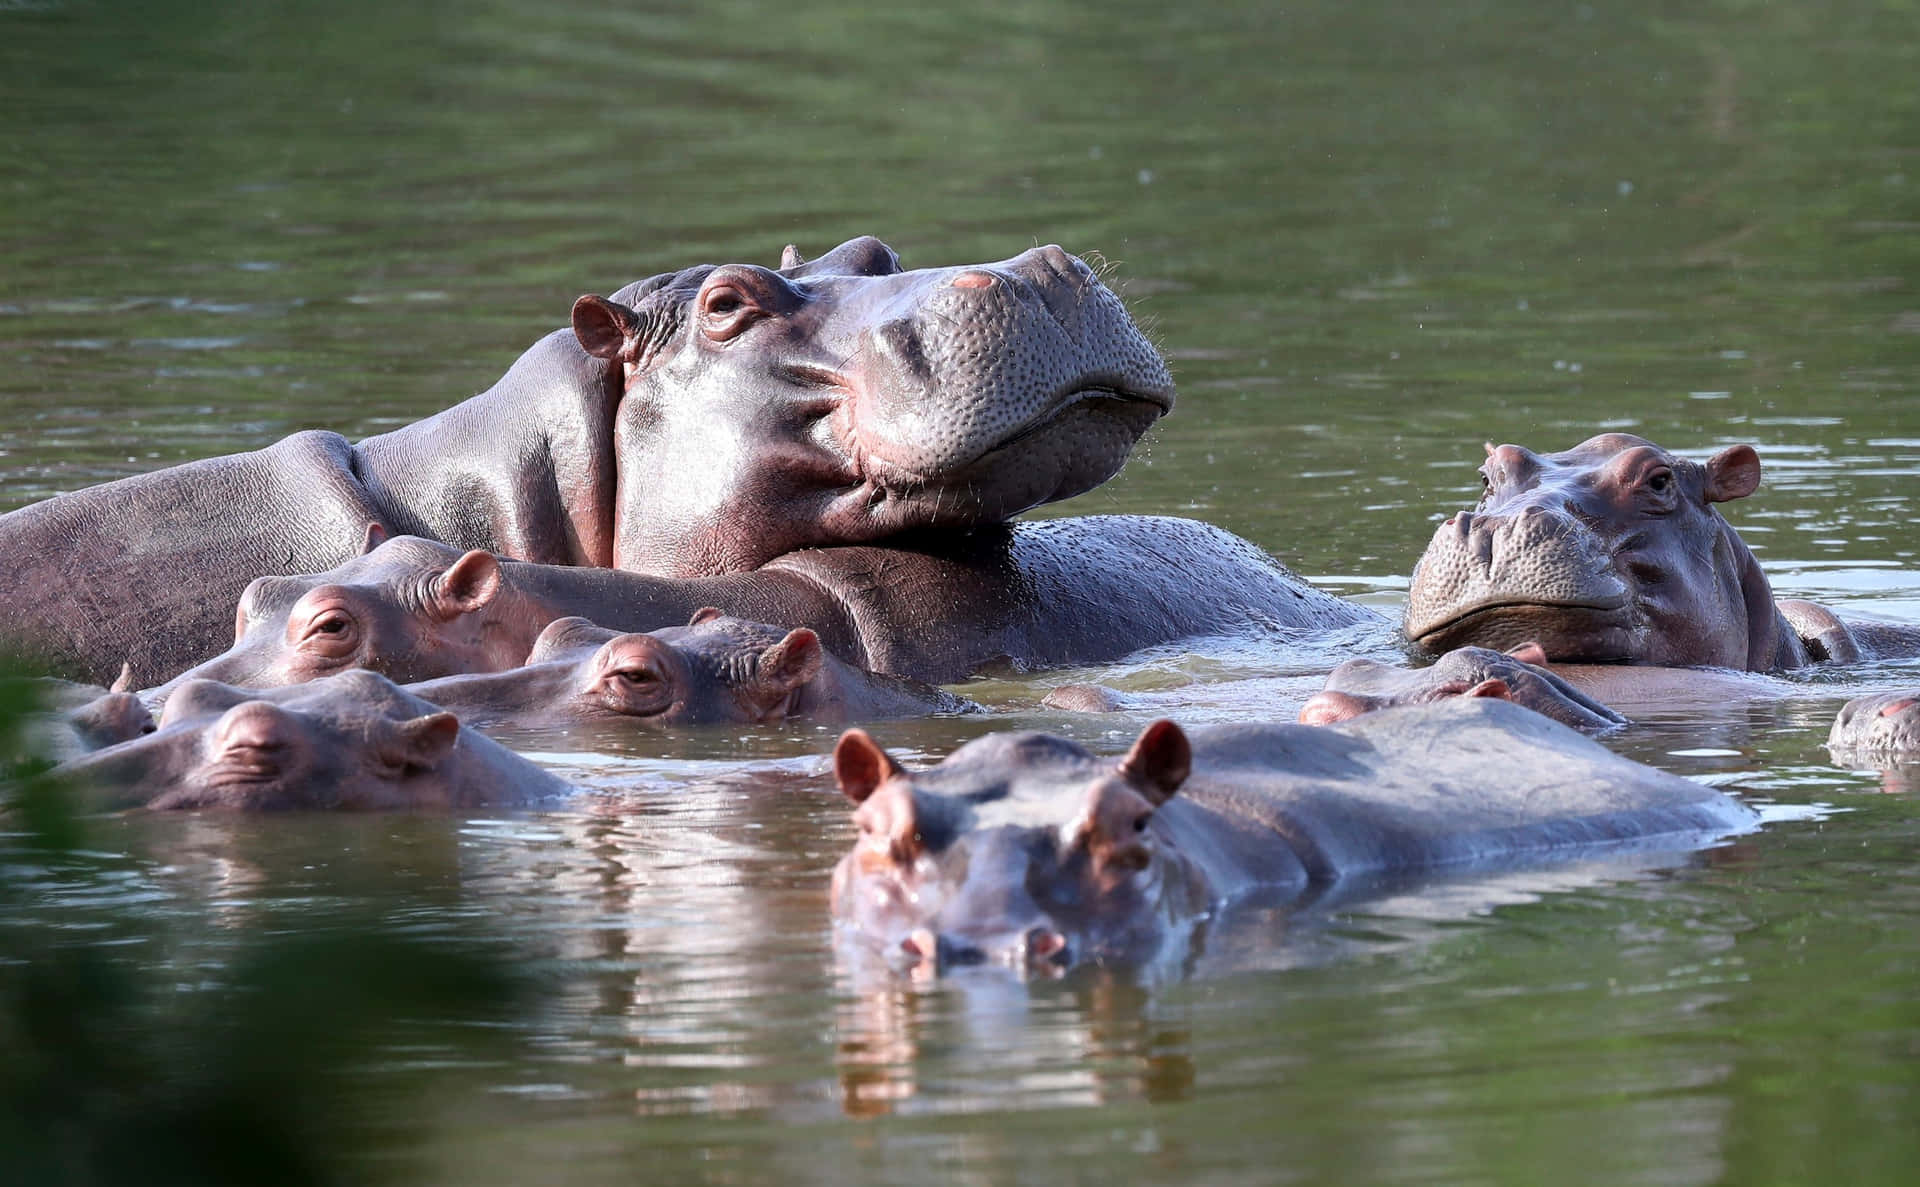 A hippo makes its way through the waters of an African lake.